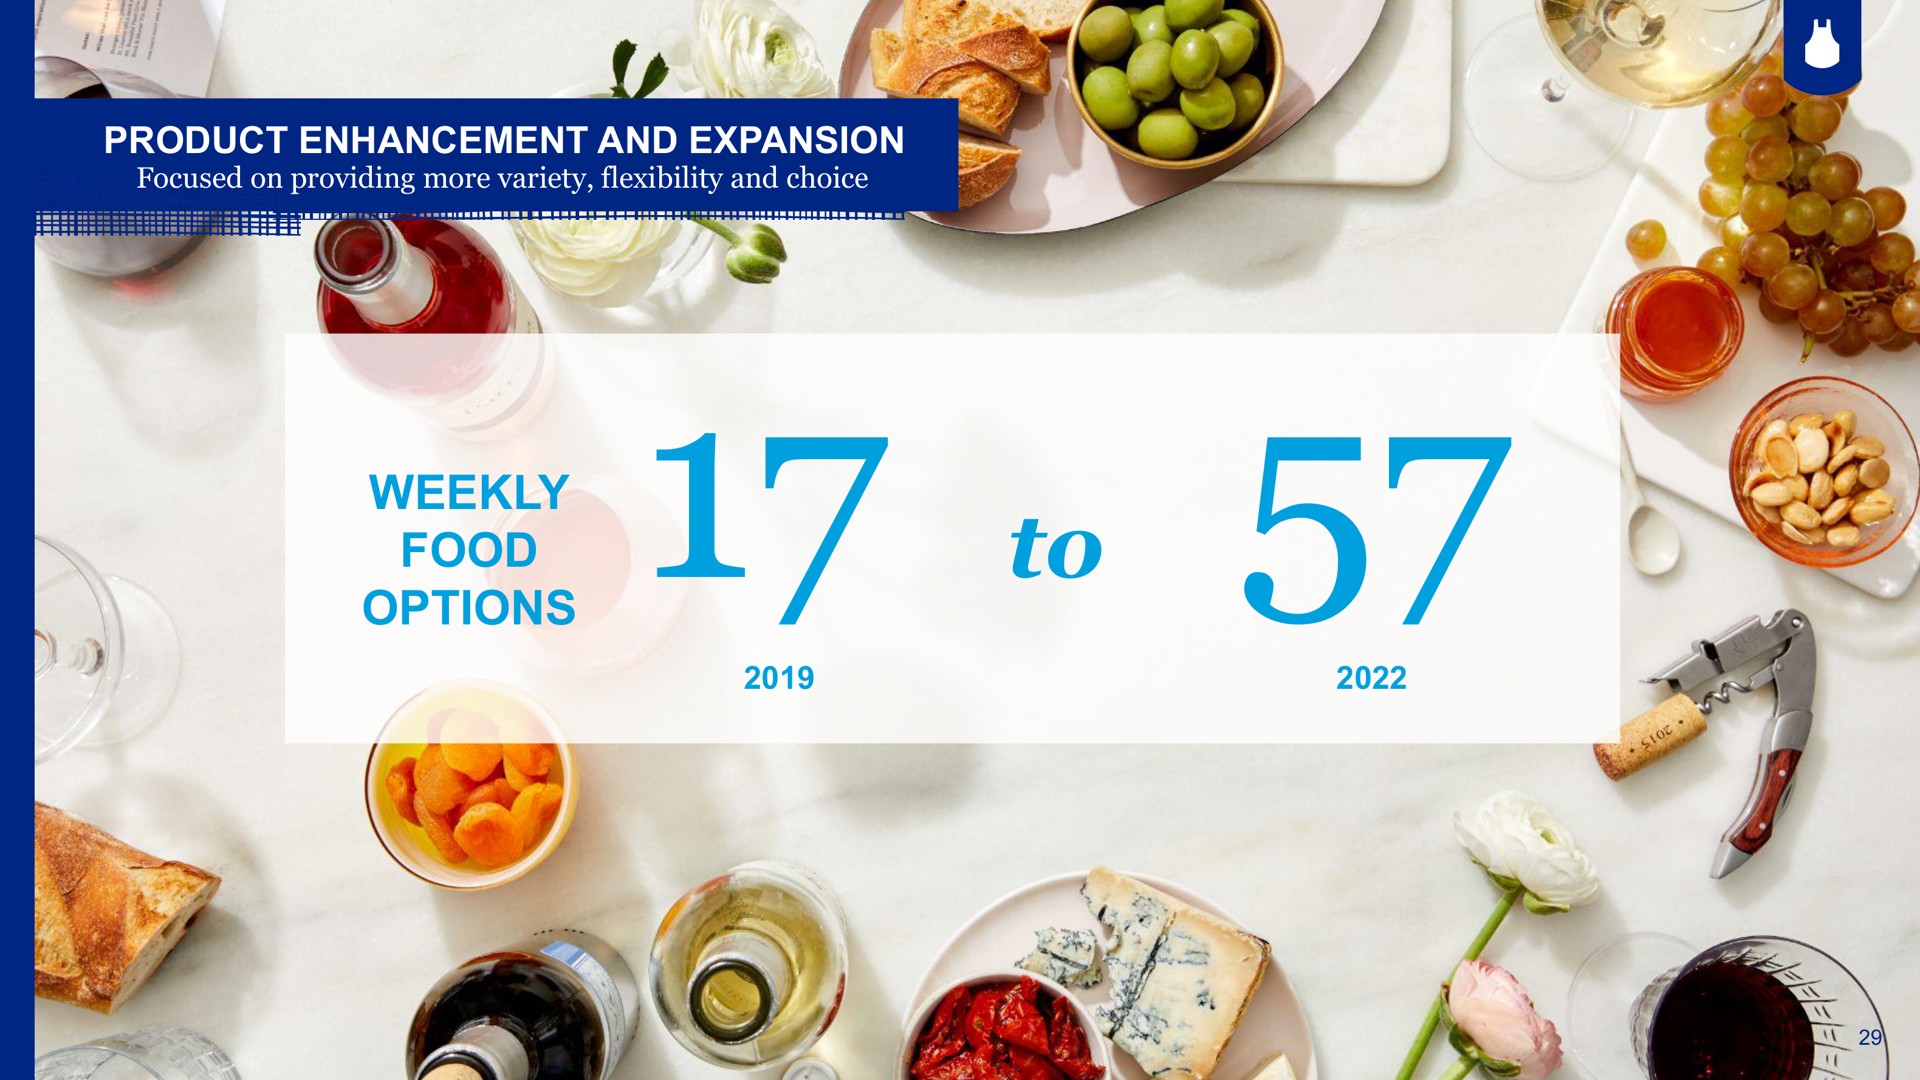 product enhancement and expansion weekly food options to | Blue Apron